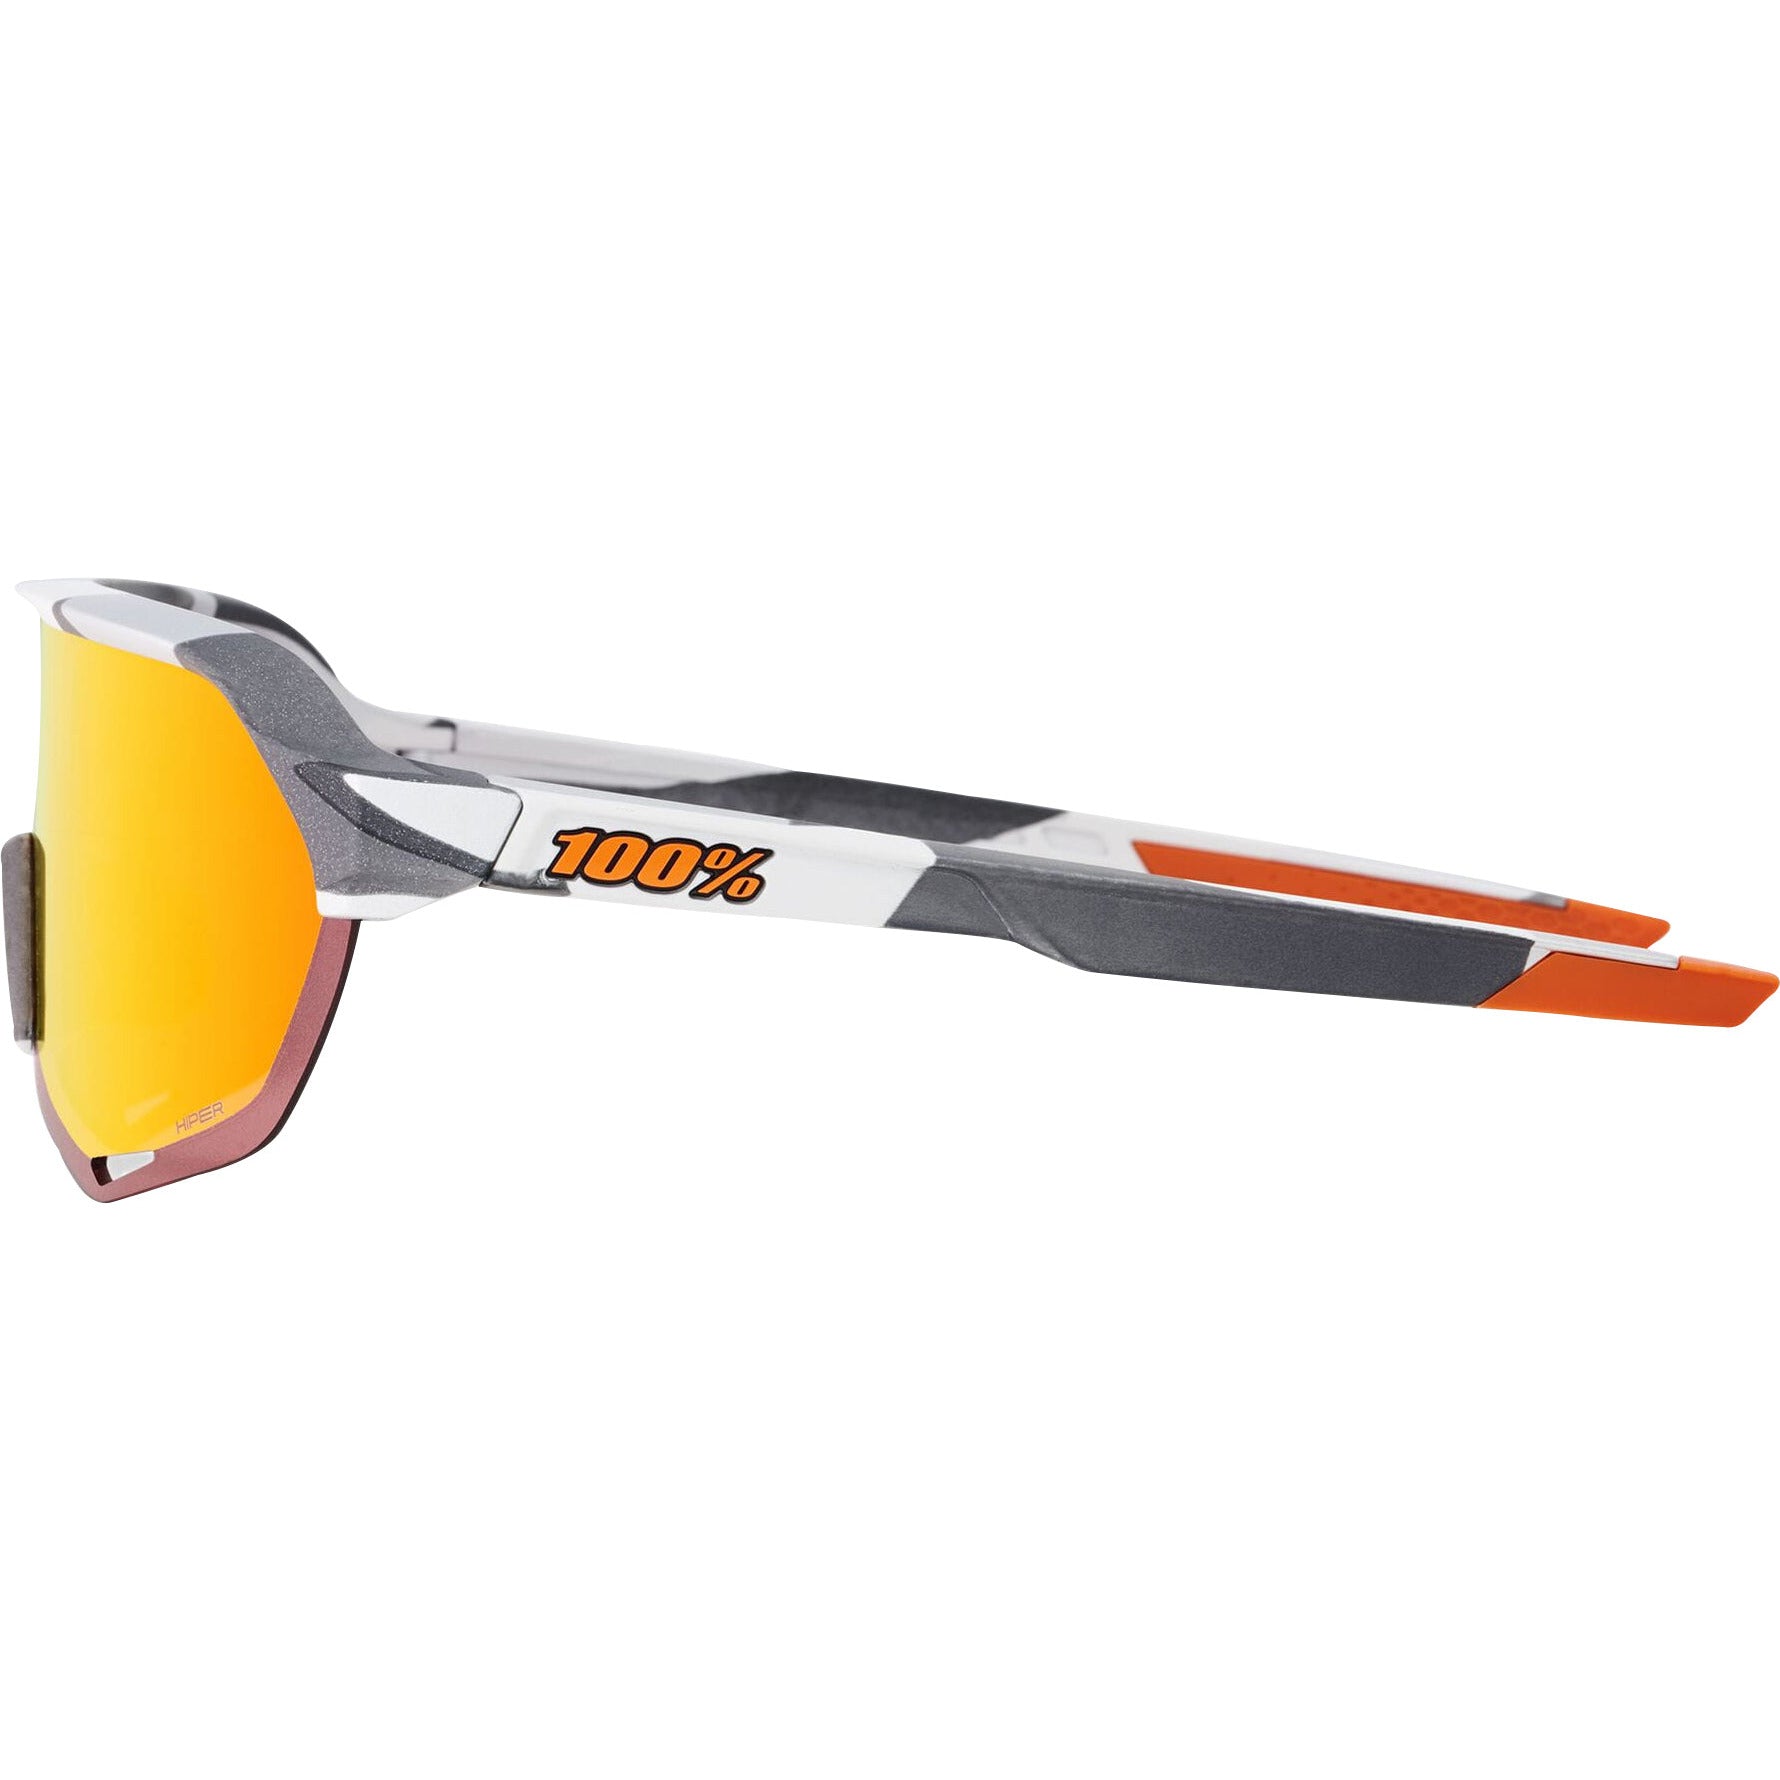 Sunglasses Soft Tact Grey Camo Op6000600008 Side - Side View